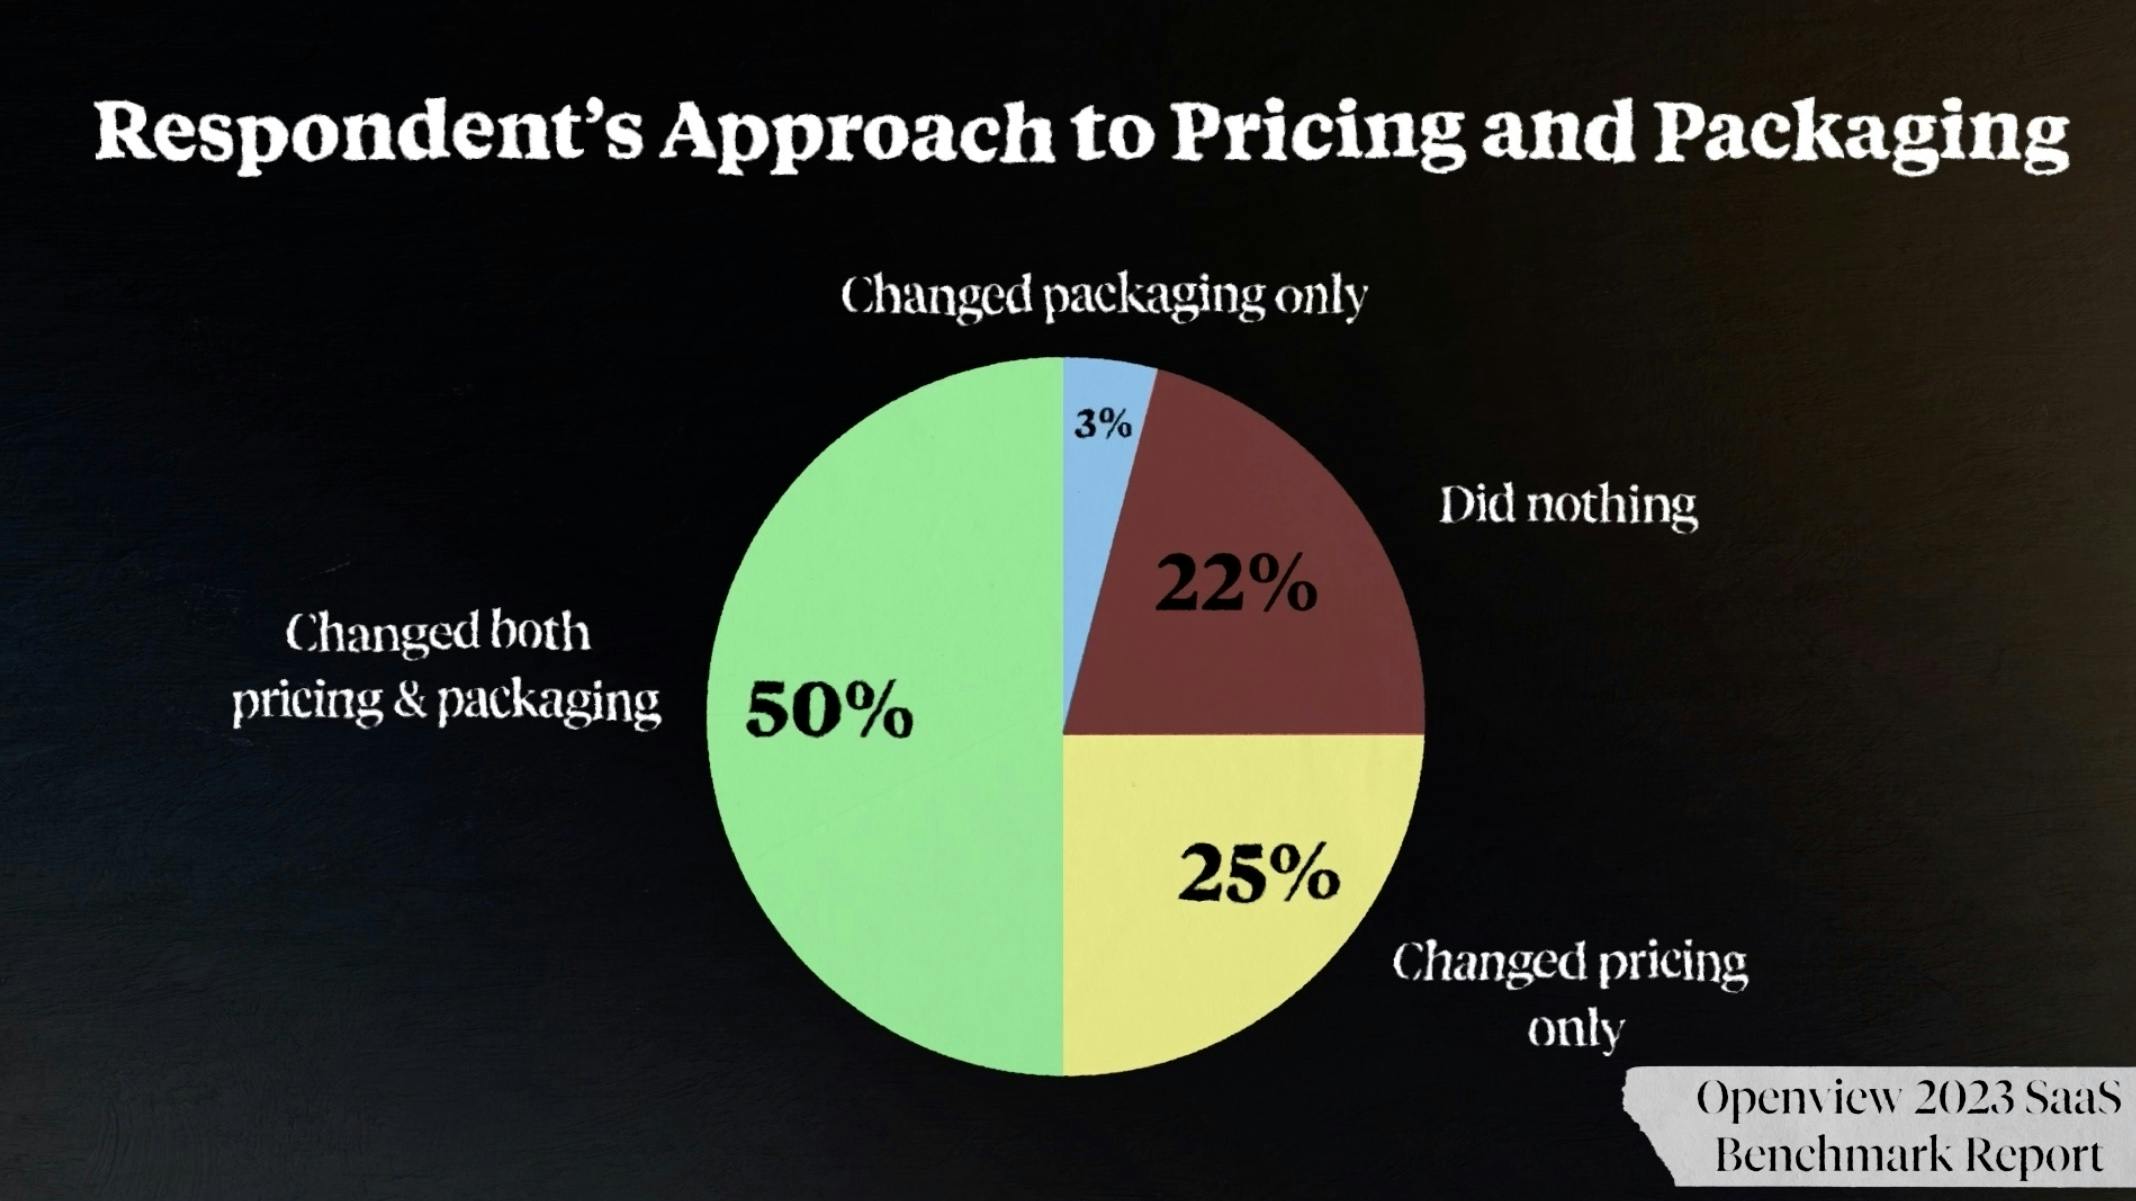 Respondent's Approach to Pricing and Packaging